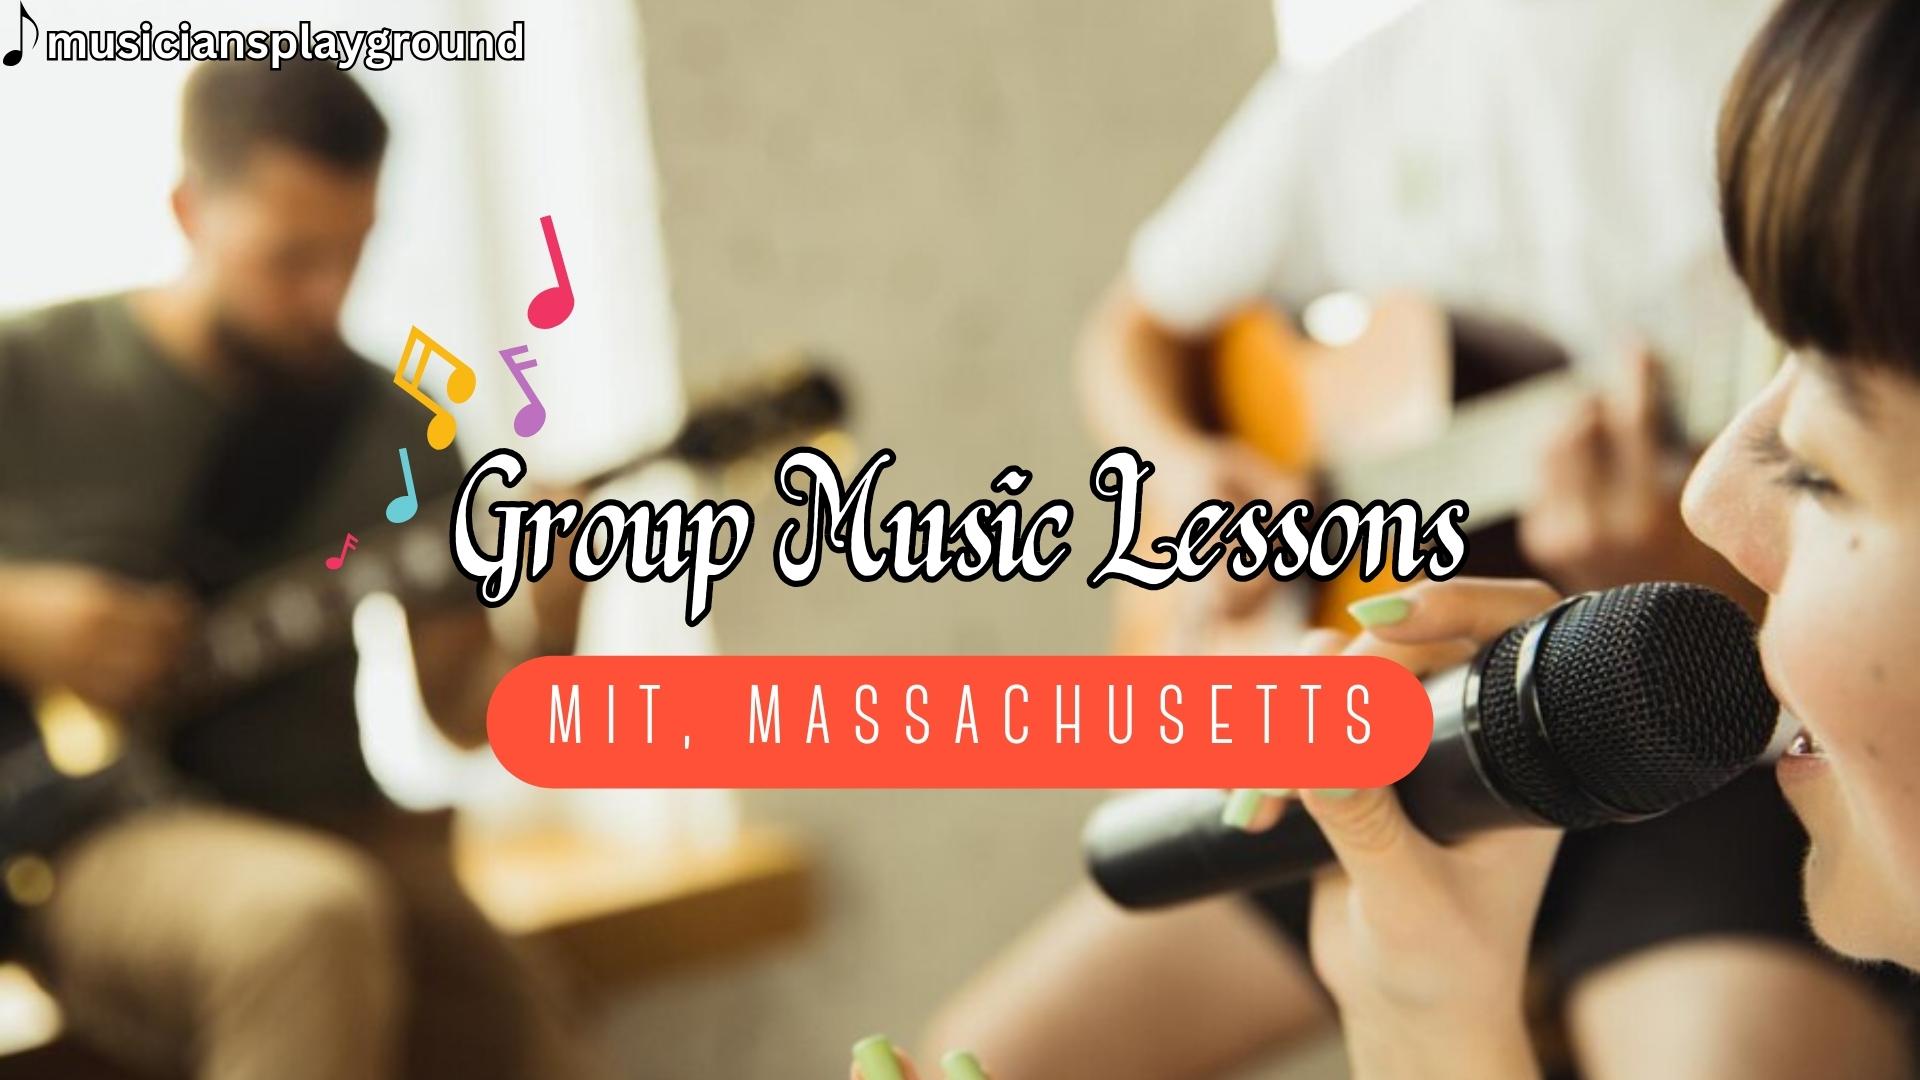 Group Music Lessons in MIT, Massachusetts: Enhancing Musical Skills at Musicians Playground